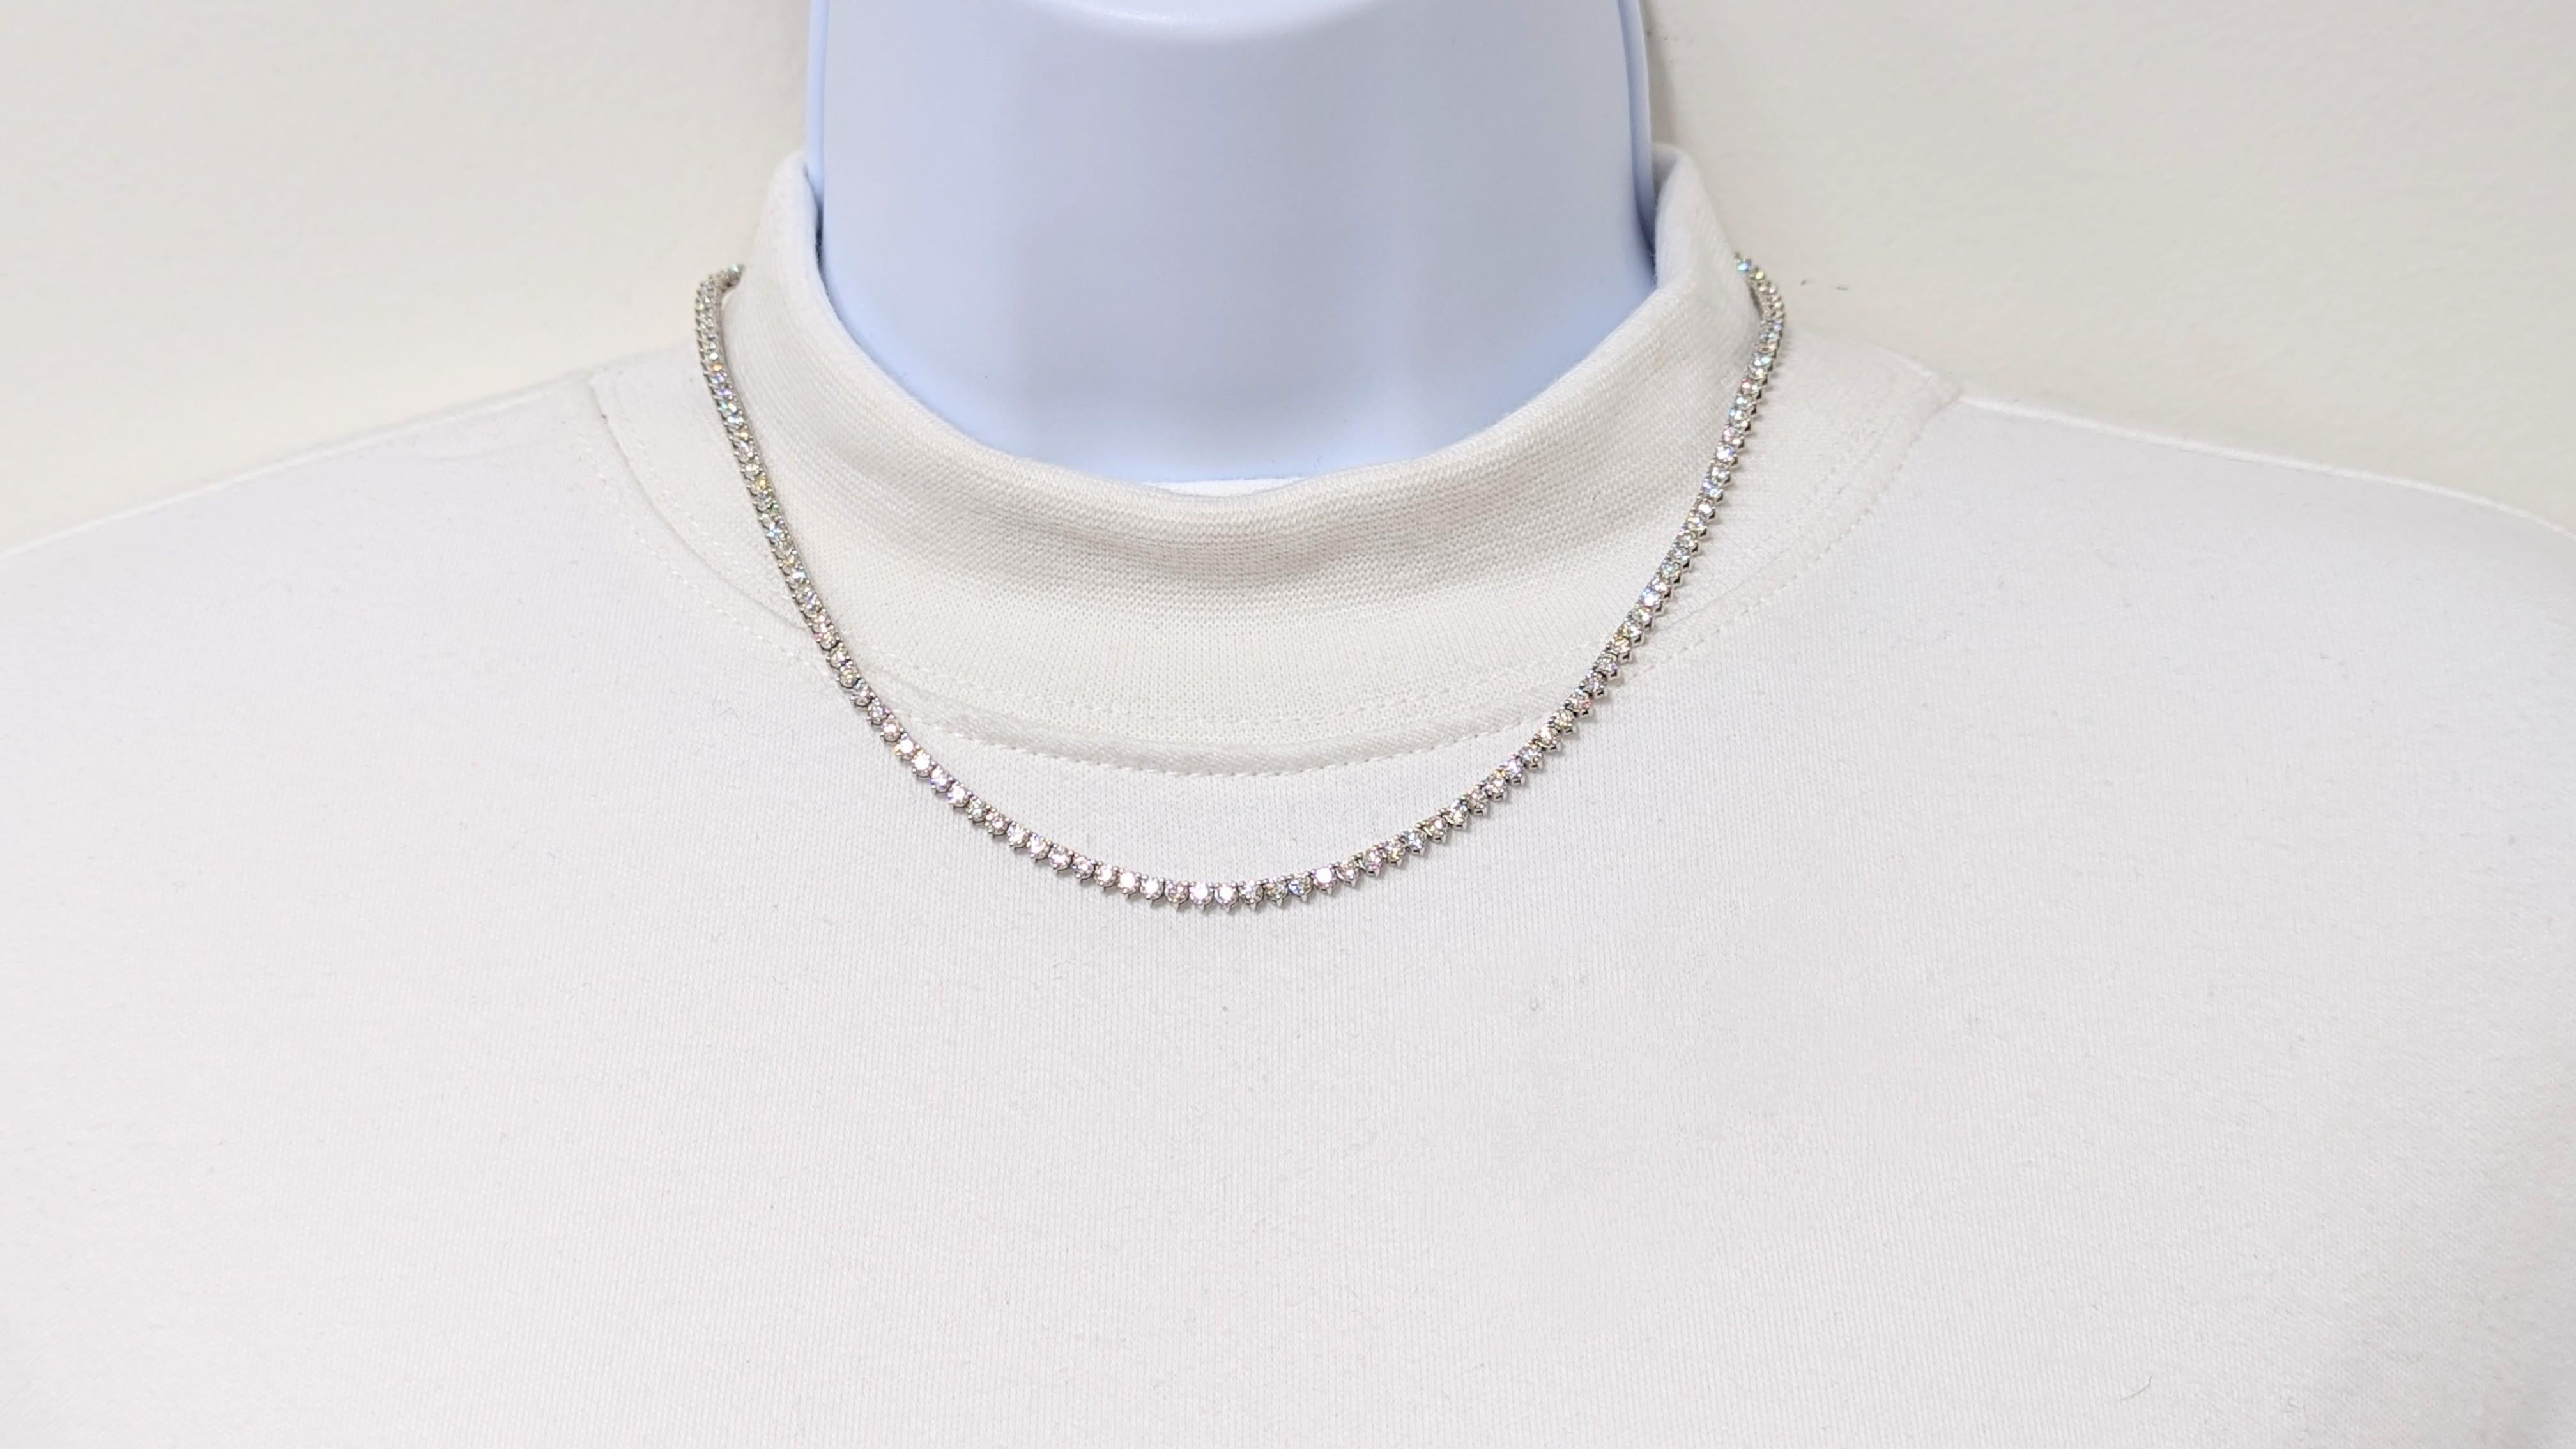 Beautiful 8.40 ct. white diamond rounds (total of 147 stones) in this 3 prong setting tennis necklace.  Handmade in 14k white gold.  Length is 15.5